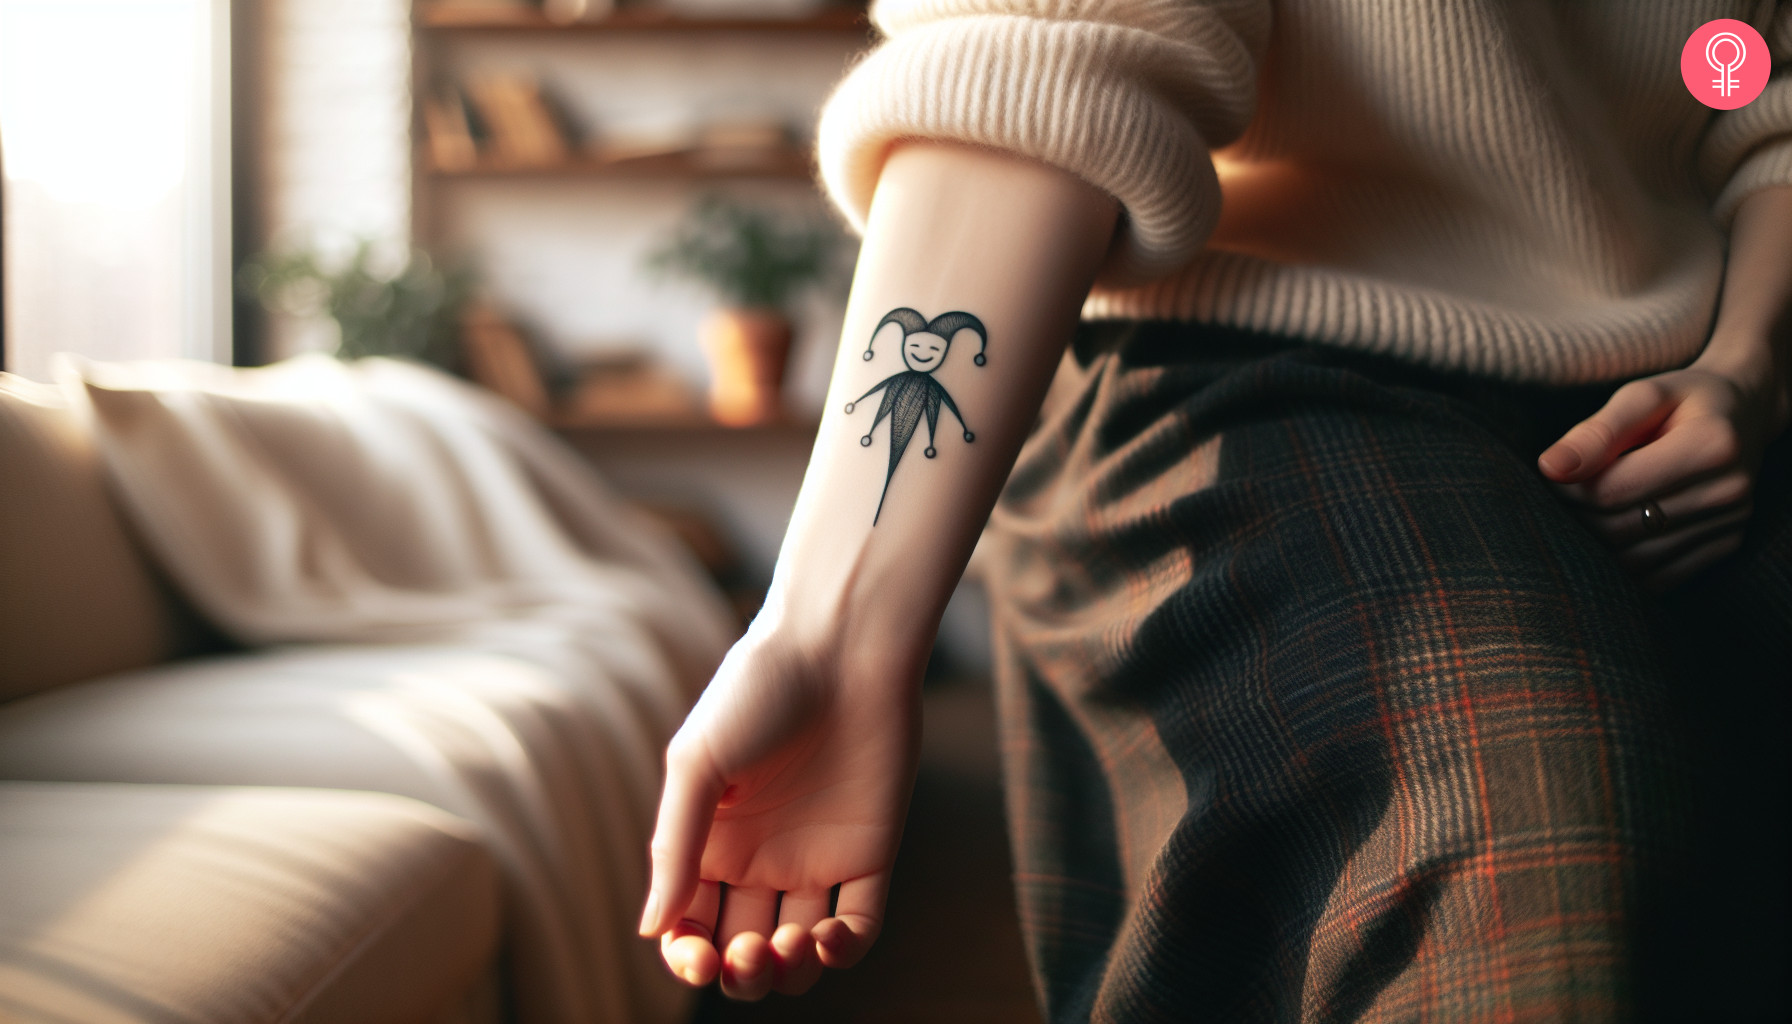 Simple jester tattoo on the forearm of a woman